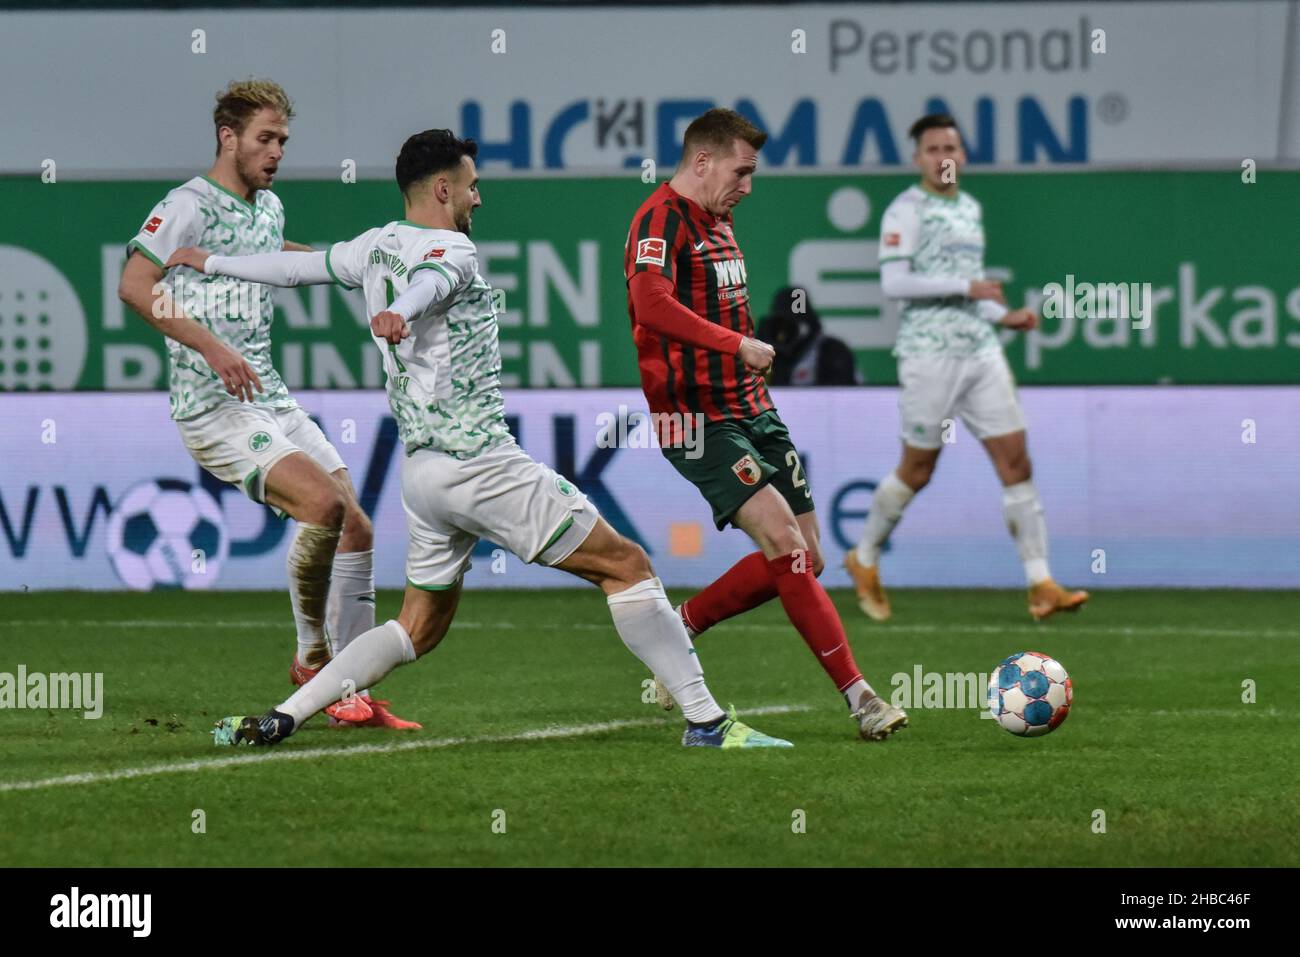 Germany ,Fuerth, Sportpark Ronhof Thomas Sommer - 18 Dec 2021 - Fussball, 1.Bundesliga - SpVgg Greuther Fuerth vs. FC Augsburg  Image: (fLTR) Sebastian Griesbeck (SpVgg Greuther Fürth,22), Maximilian Bauer (SpVgg Greuther Fürth,4), Andre Hahn (FC Augsburg, 28)  DFL regulations prohibit any use of photographs as image sequences and or quasi-video Credit: Ryan Evans/Alamy Live News Stock Photo